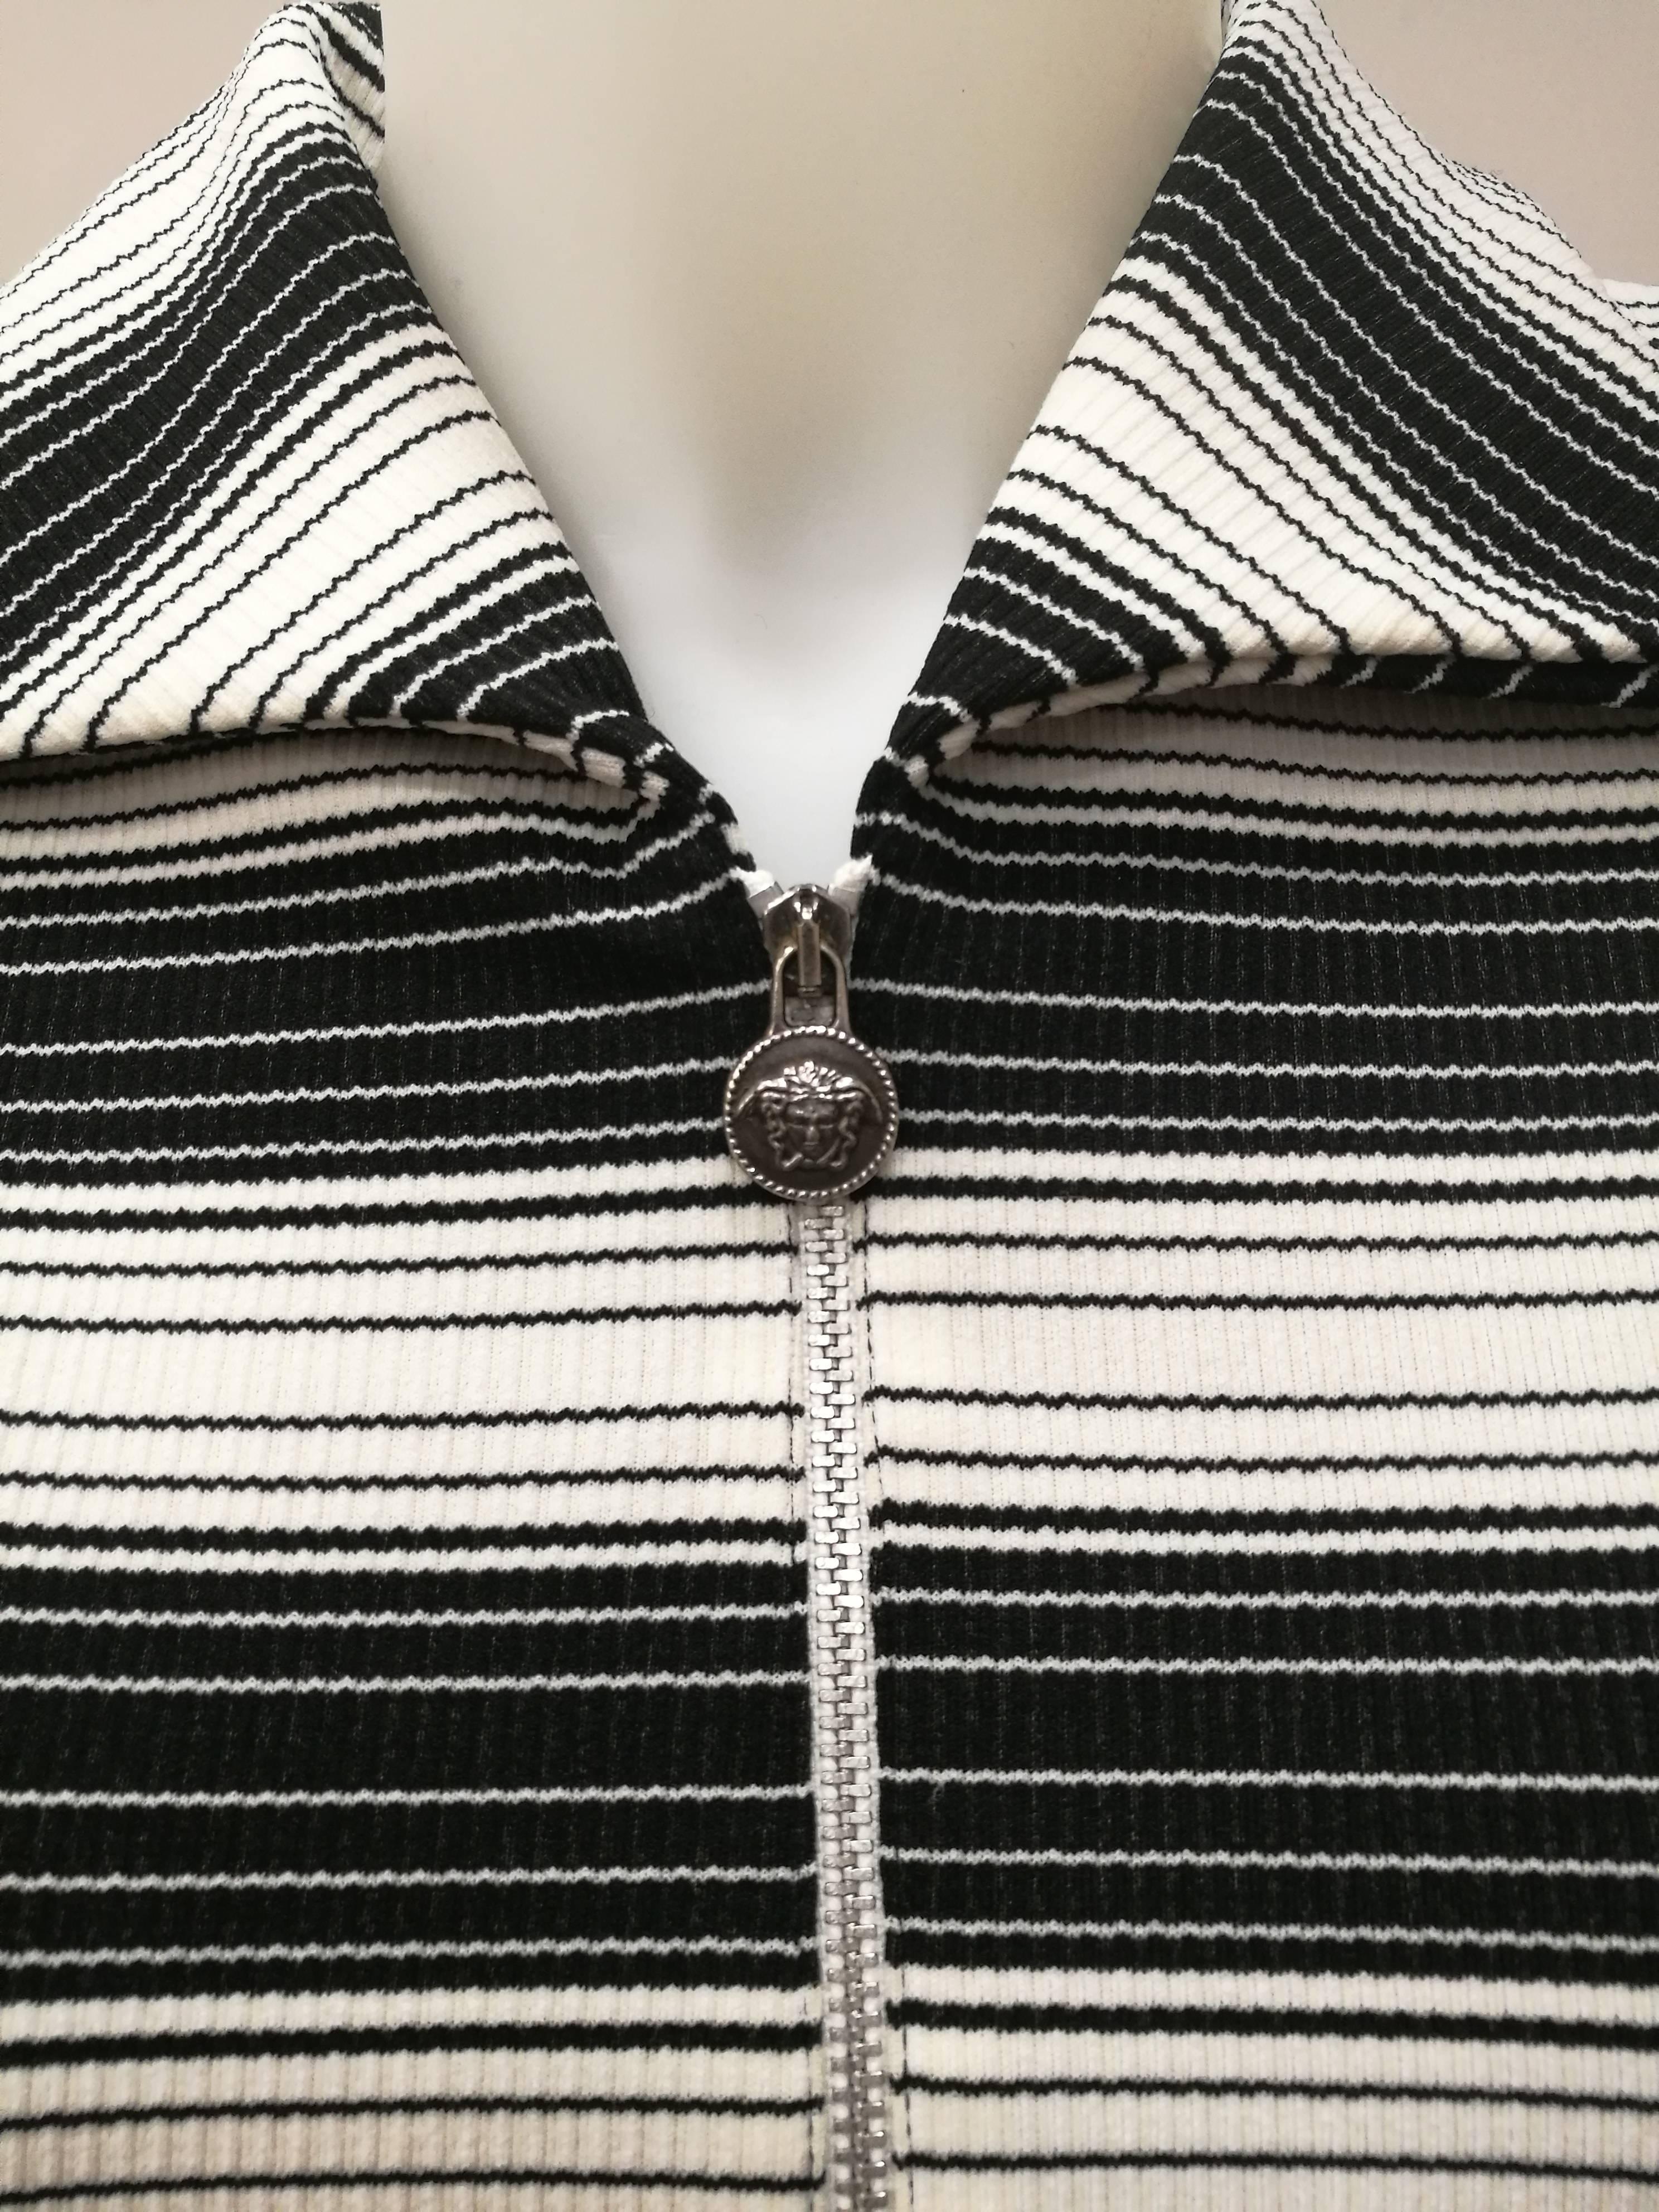 Versace Jeans Couture Black & White Stripes Jacket

Versace serial number limited edition jacket 255630

Totally made in italy in italian size range M

Composition: 92 polyestere 8 elastane